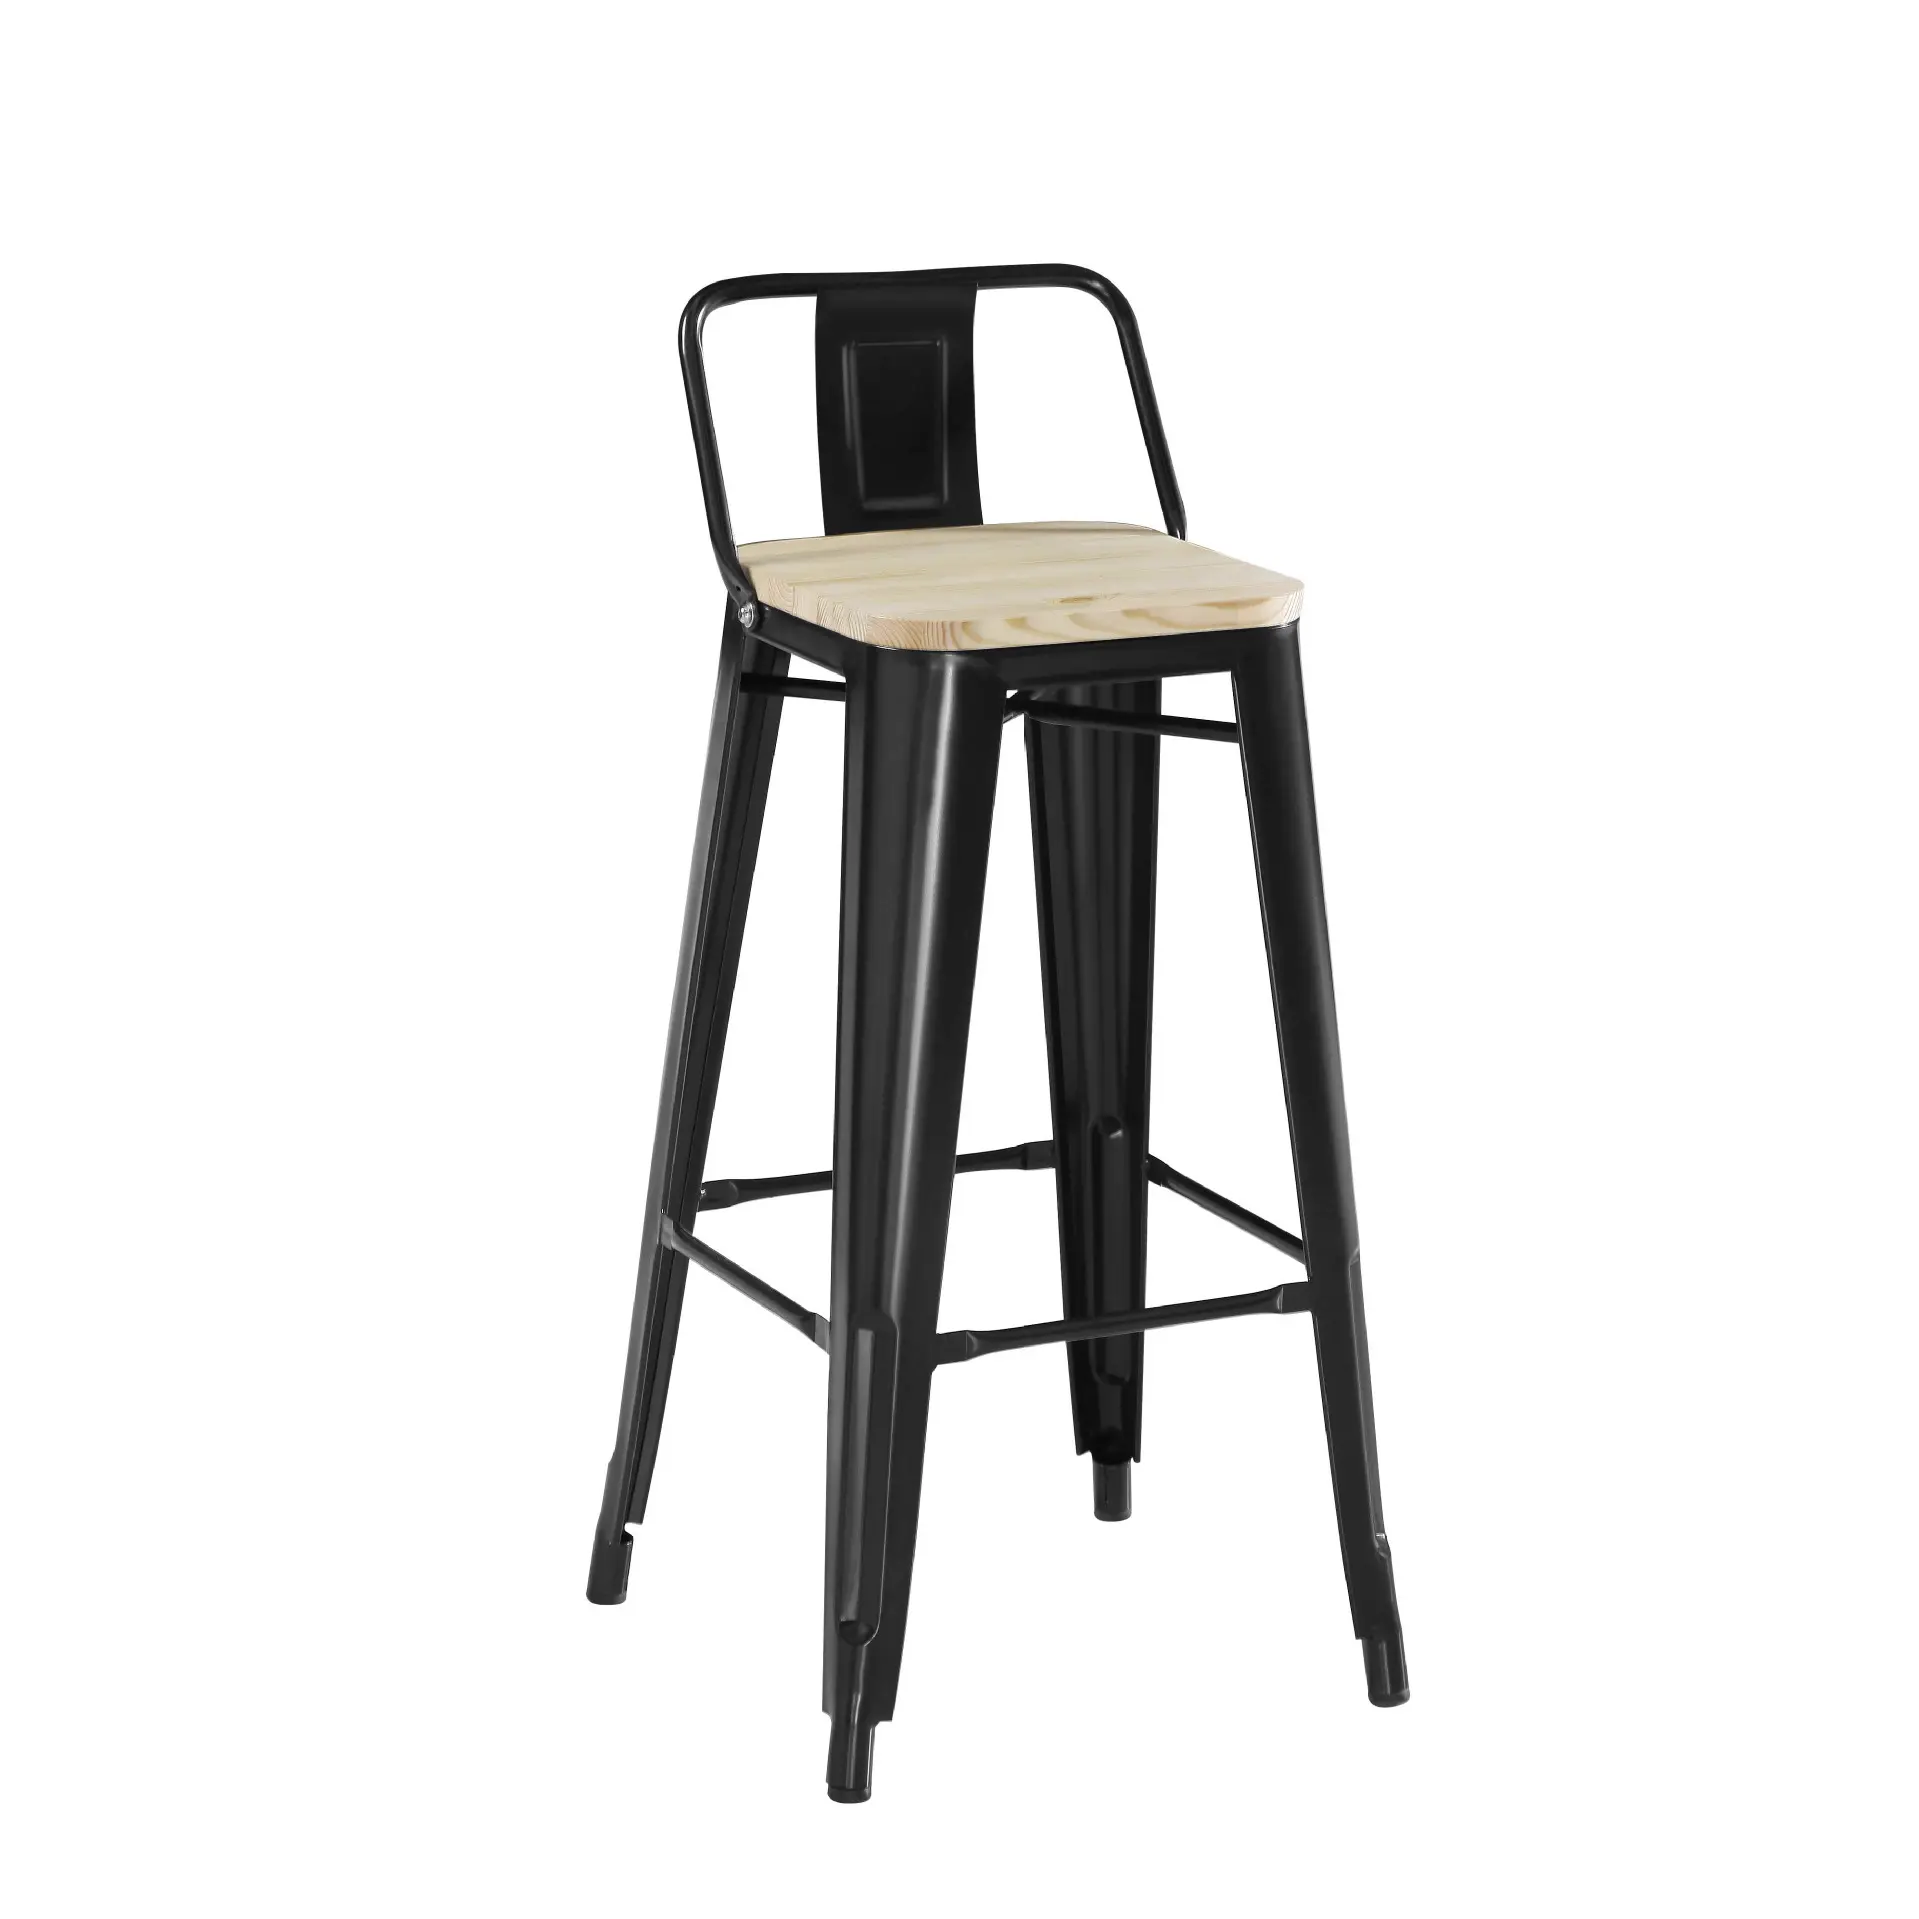 High Bar Stool High Chair PP Plastic Luxury Wholesale Modern Simple Kitchen Bar Stools, Customized Metal Iron Industrial 2 Years